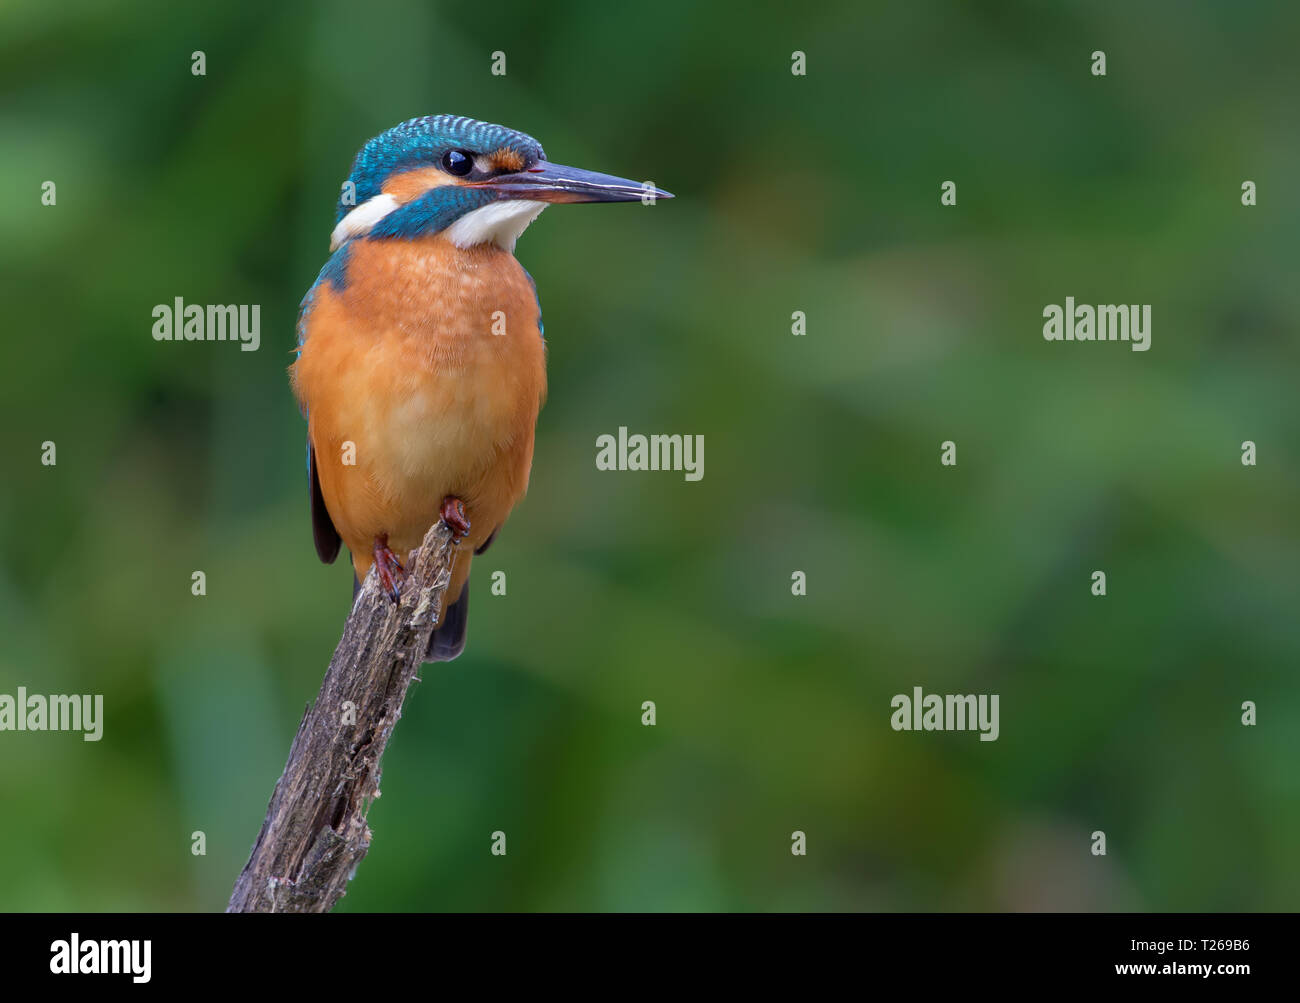 Common kingfisher posing with intent stare over grass Stock Photo